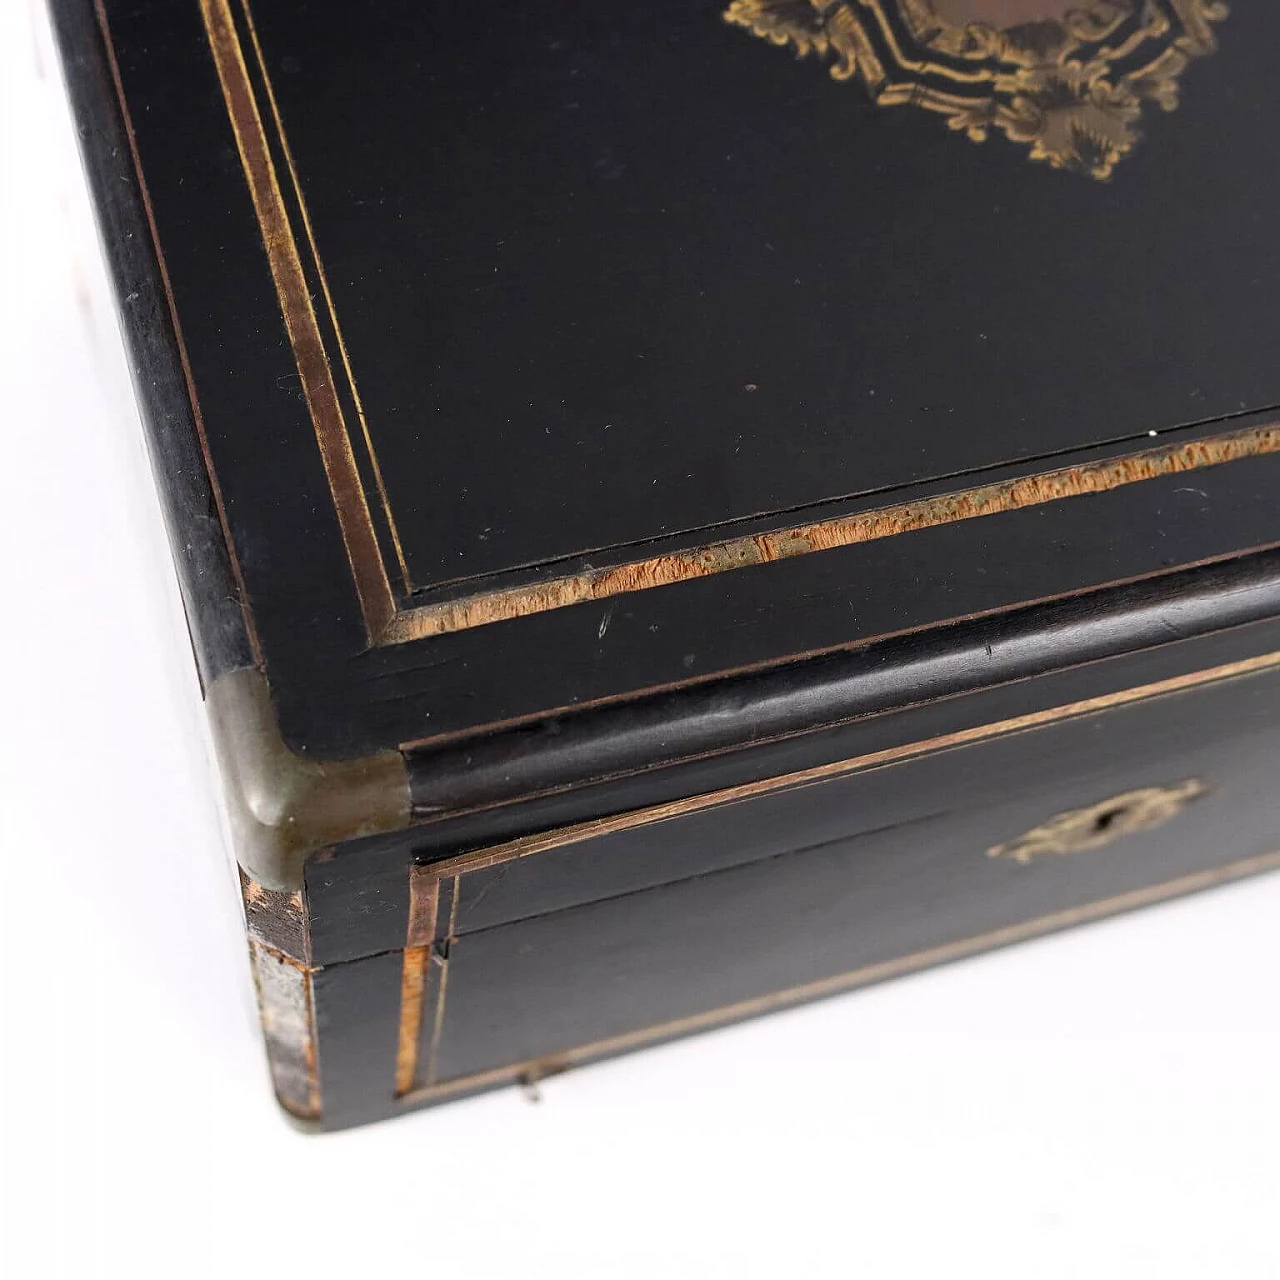 Ebony veneer sewing box with inlay and brass profiles, 19th century 19